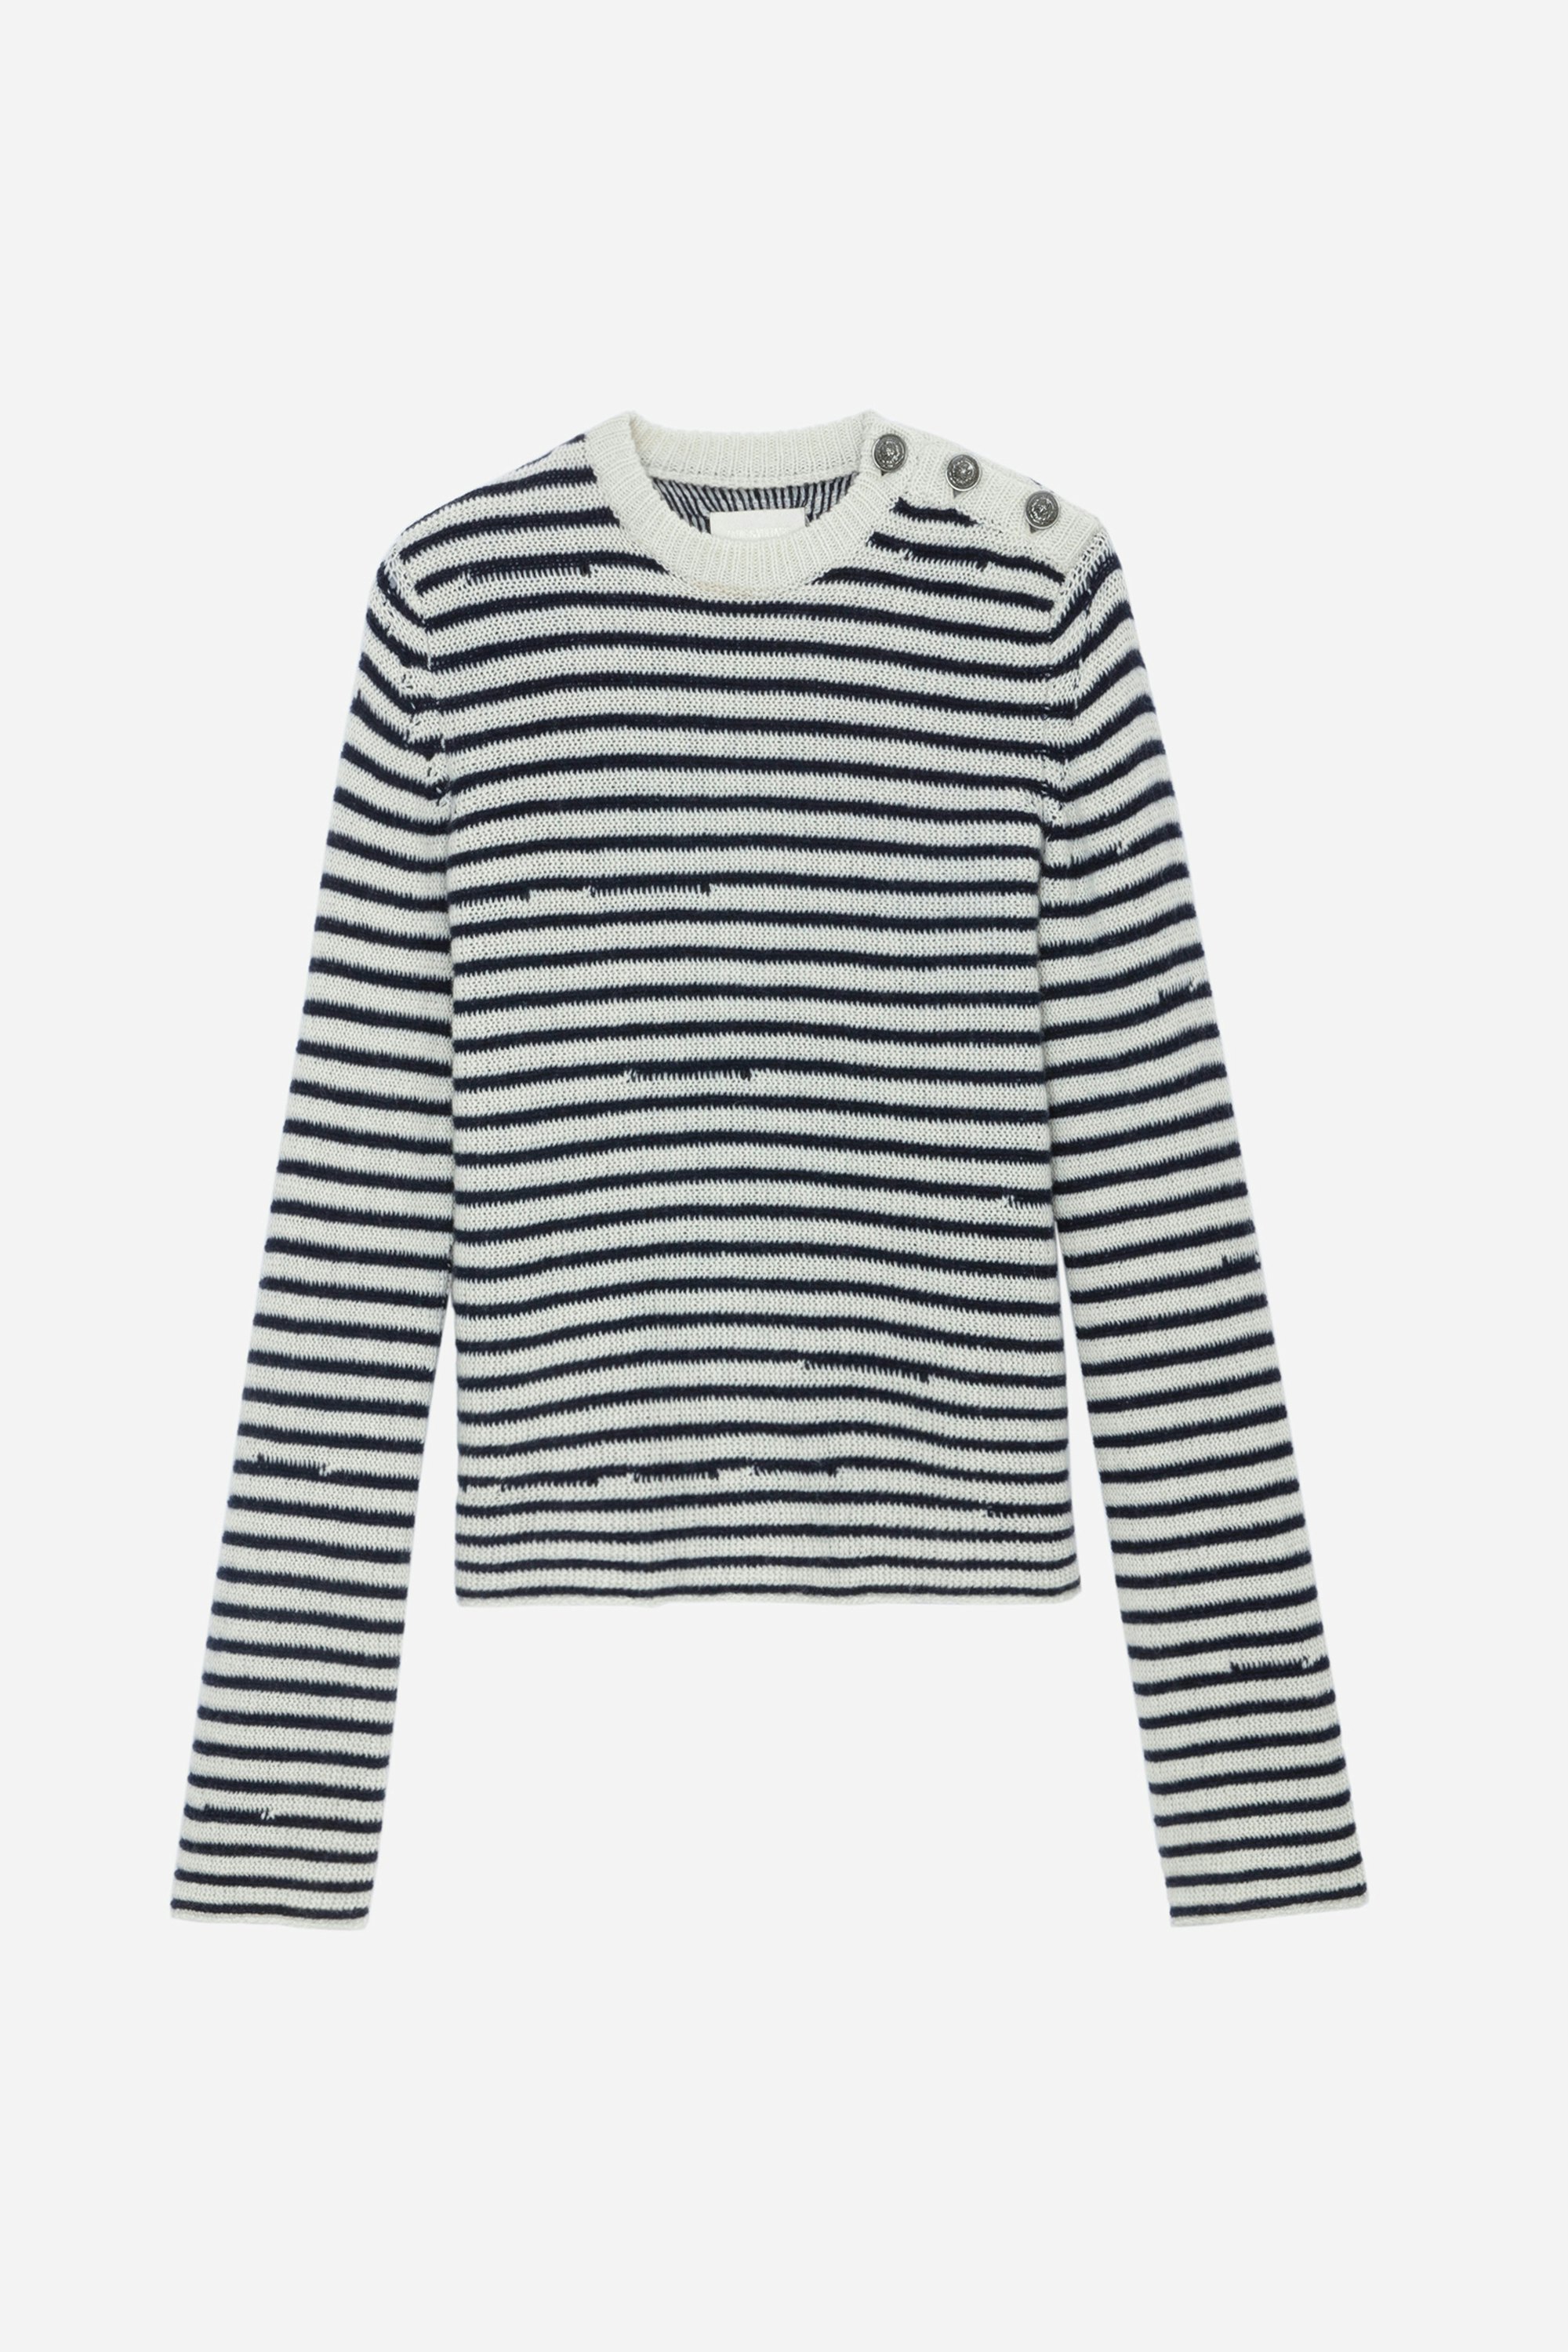 Jade Jumper - Women's striped ecru wool and cashmere sweater with buttons.